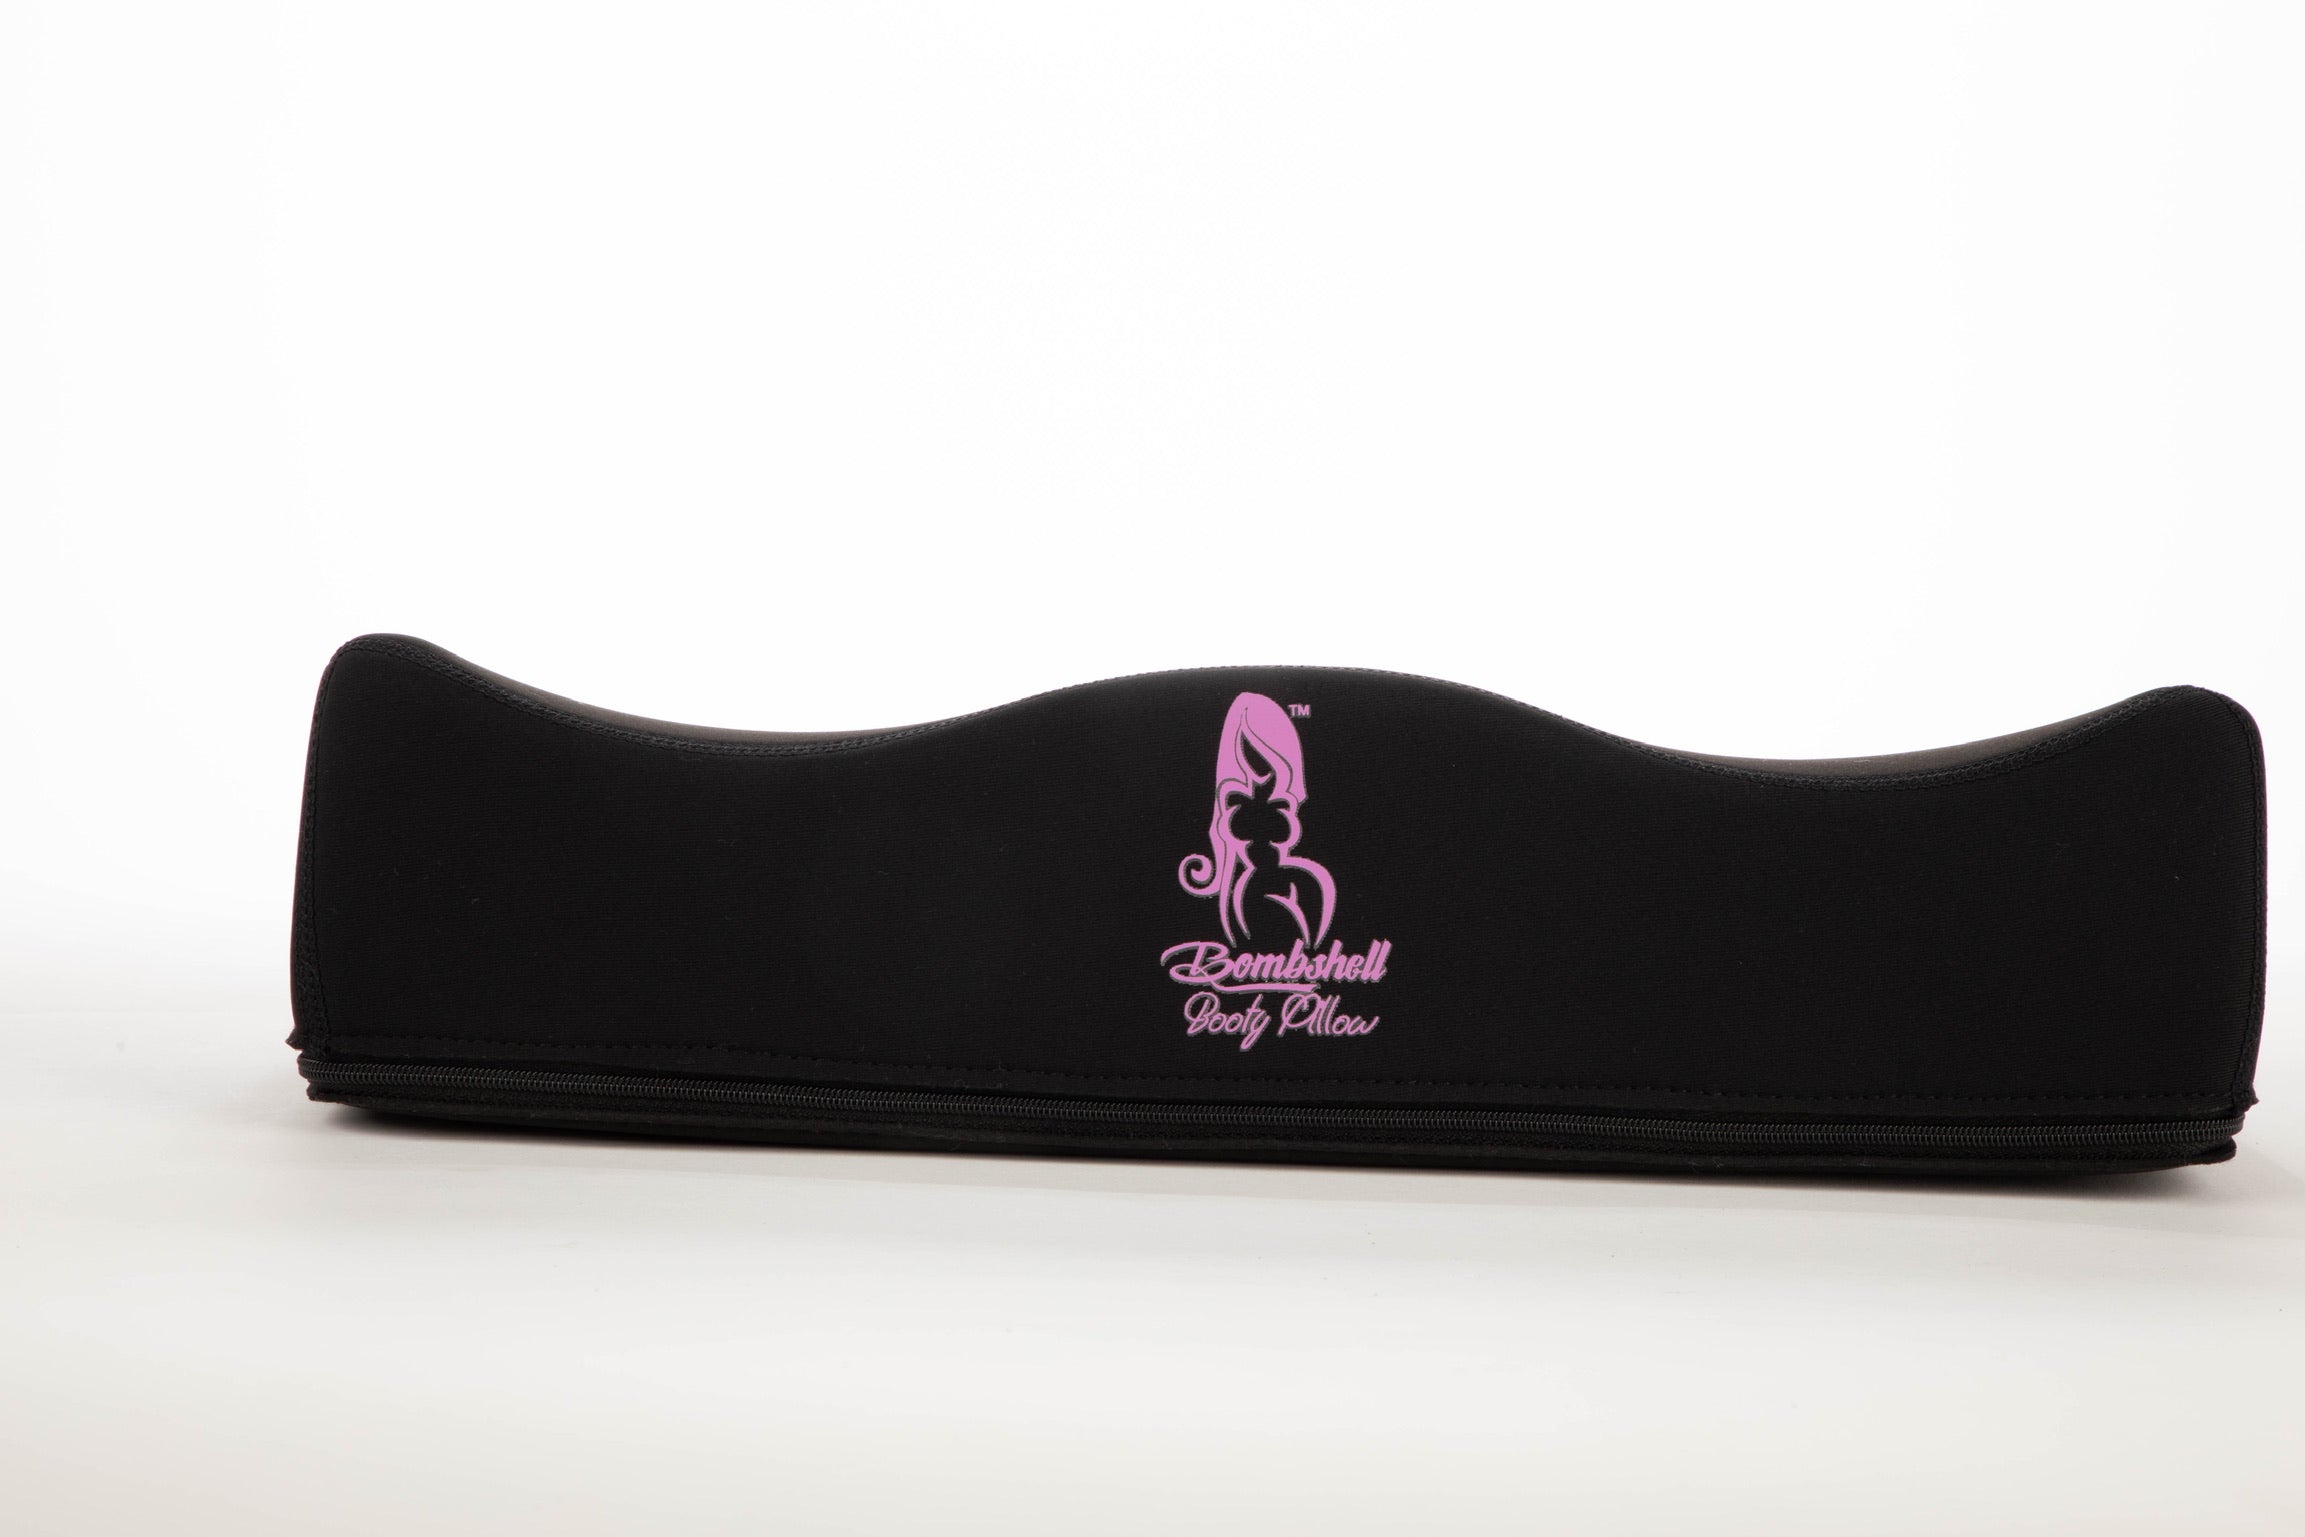 Bombshell Booty Pillow - BBL Pillow for Driving & Backrest Support Combo by Bombshell Booty Pillow